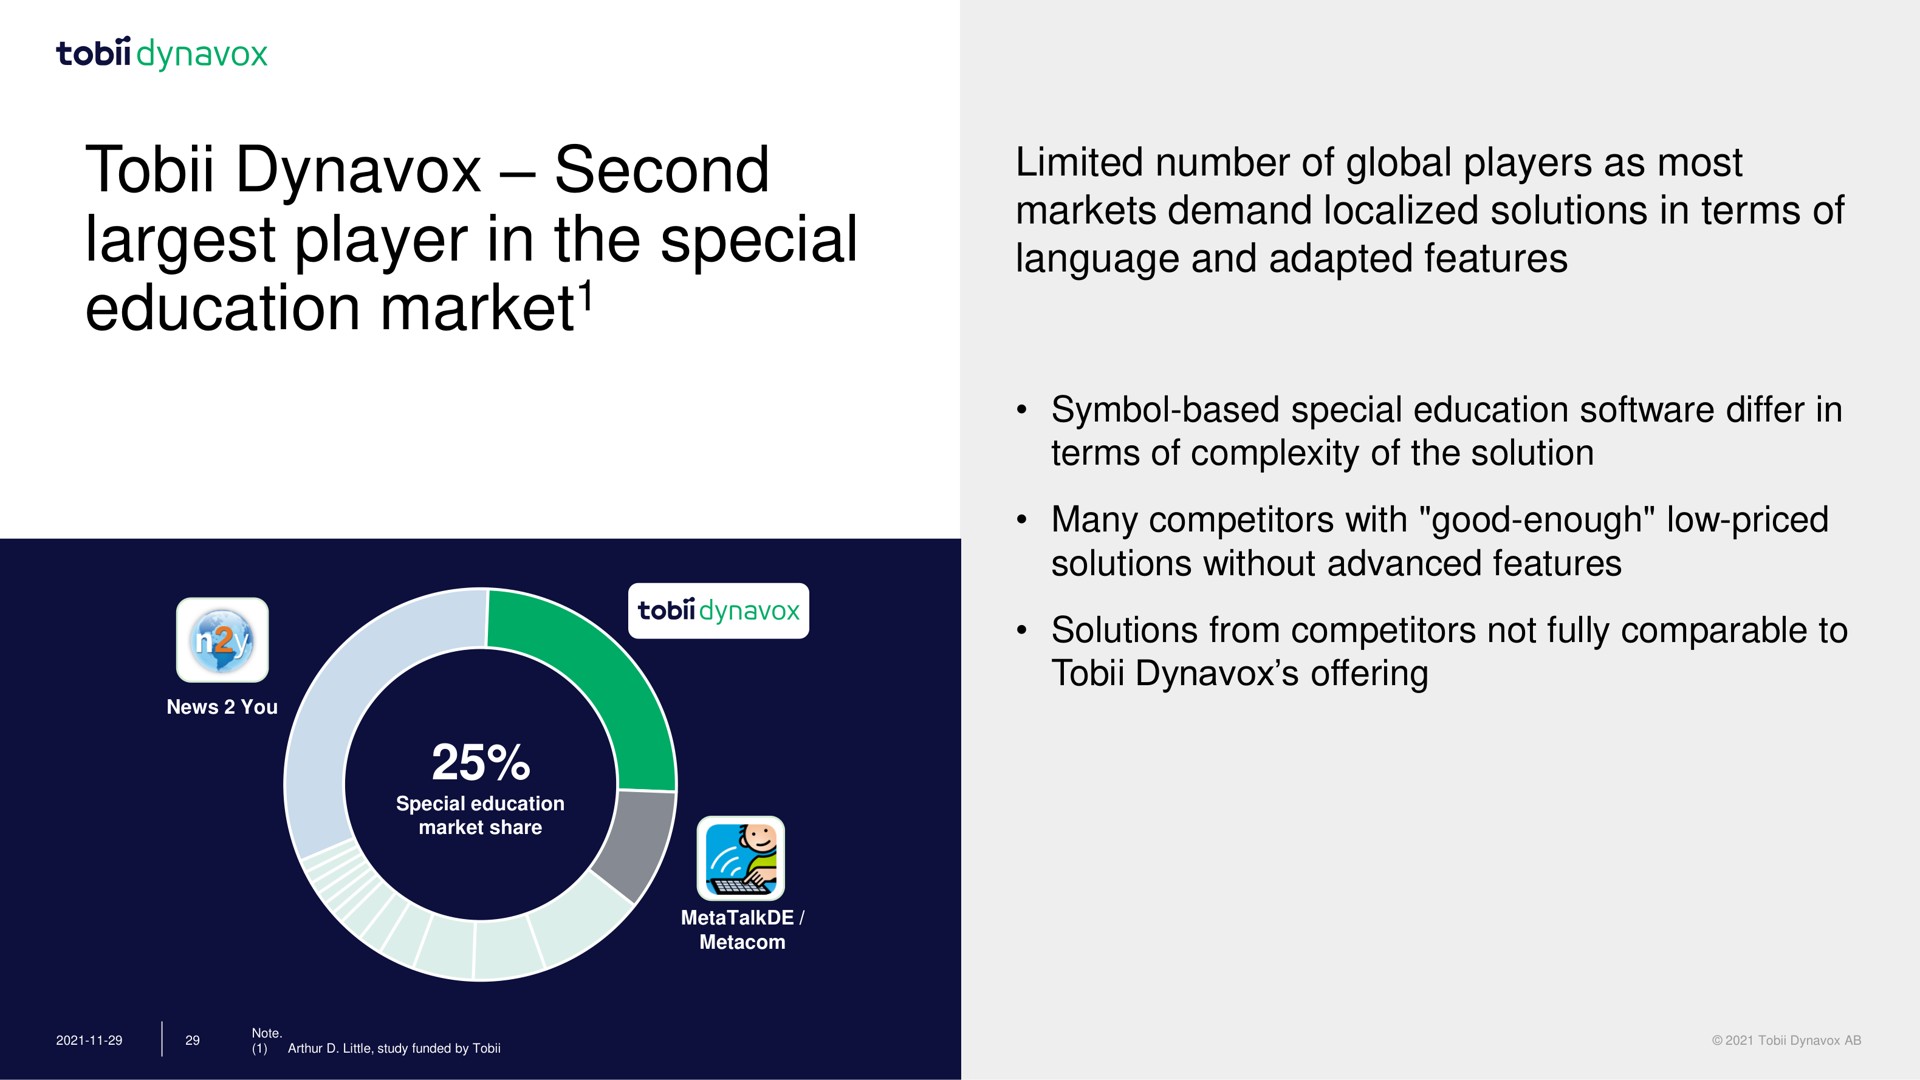 second player in the special education market limited number of global players as most markets demand localized solutions in terms of language and adapted features market poe | Tobii Dynavox